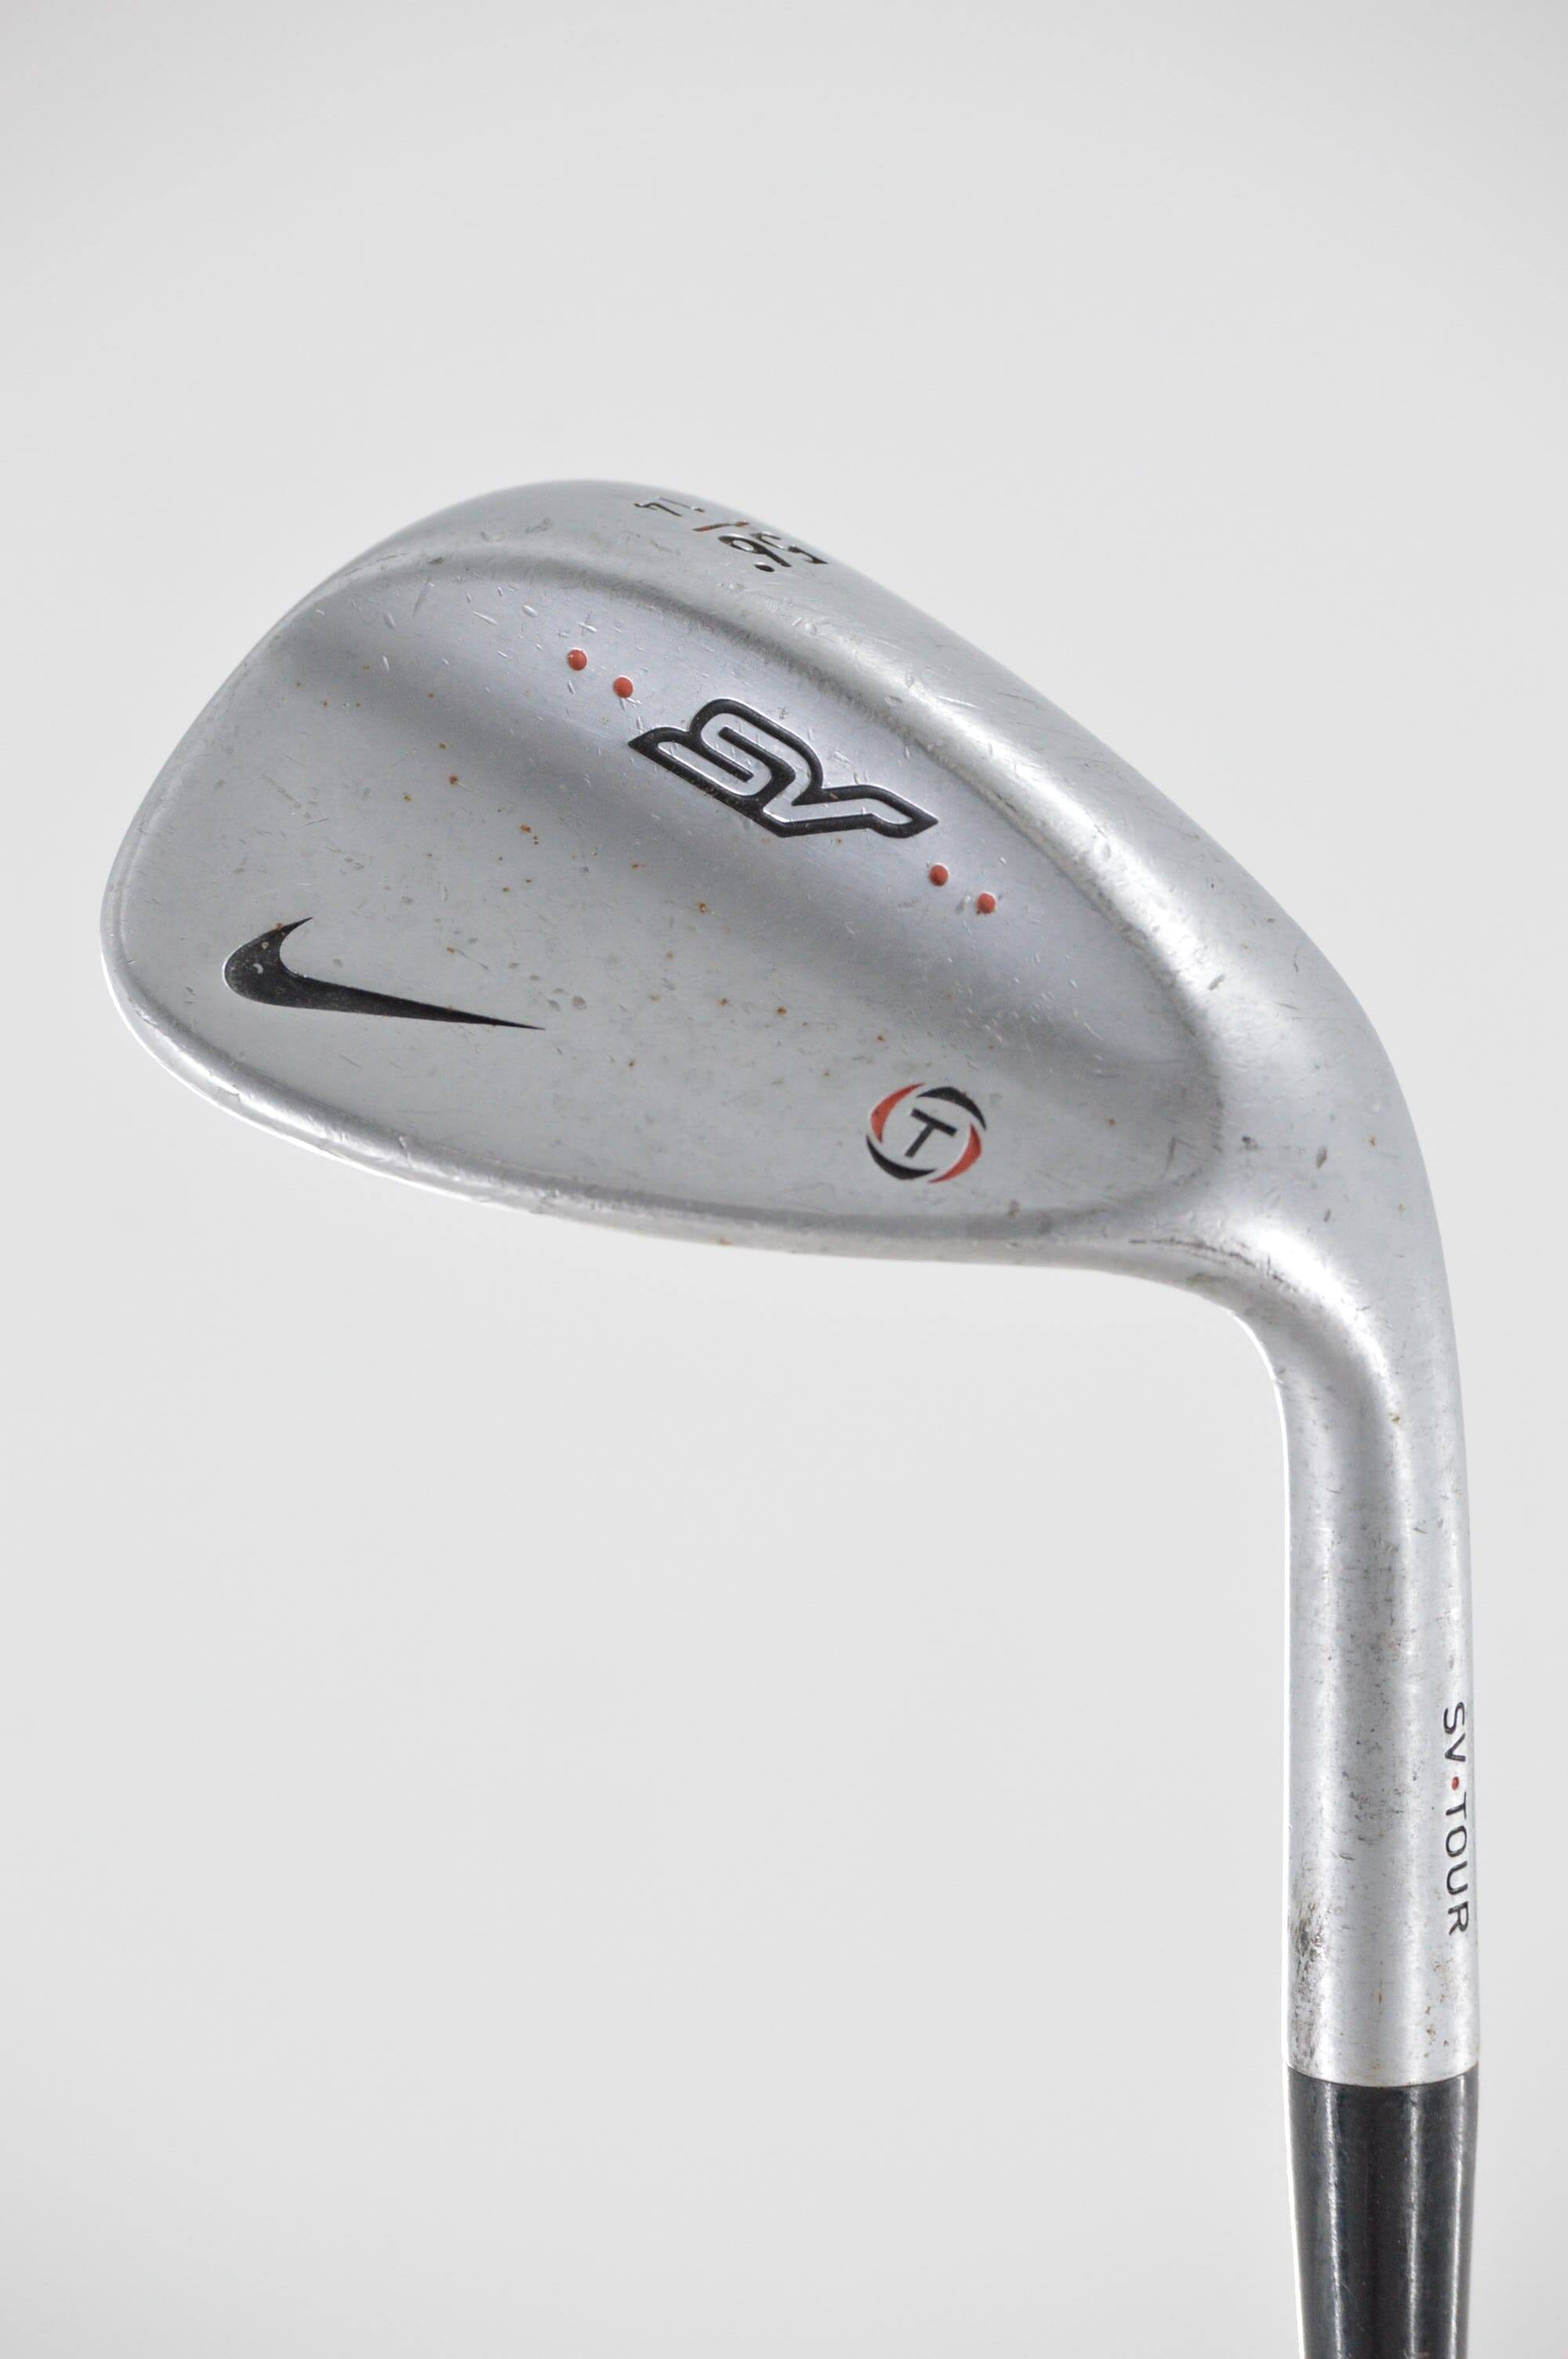 Nike SV Tour 56 Degree Wedge S Flex 35" Golf Clubs GolfRoots 